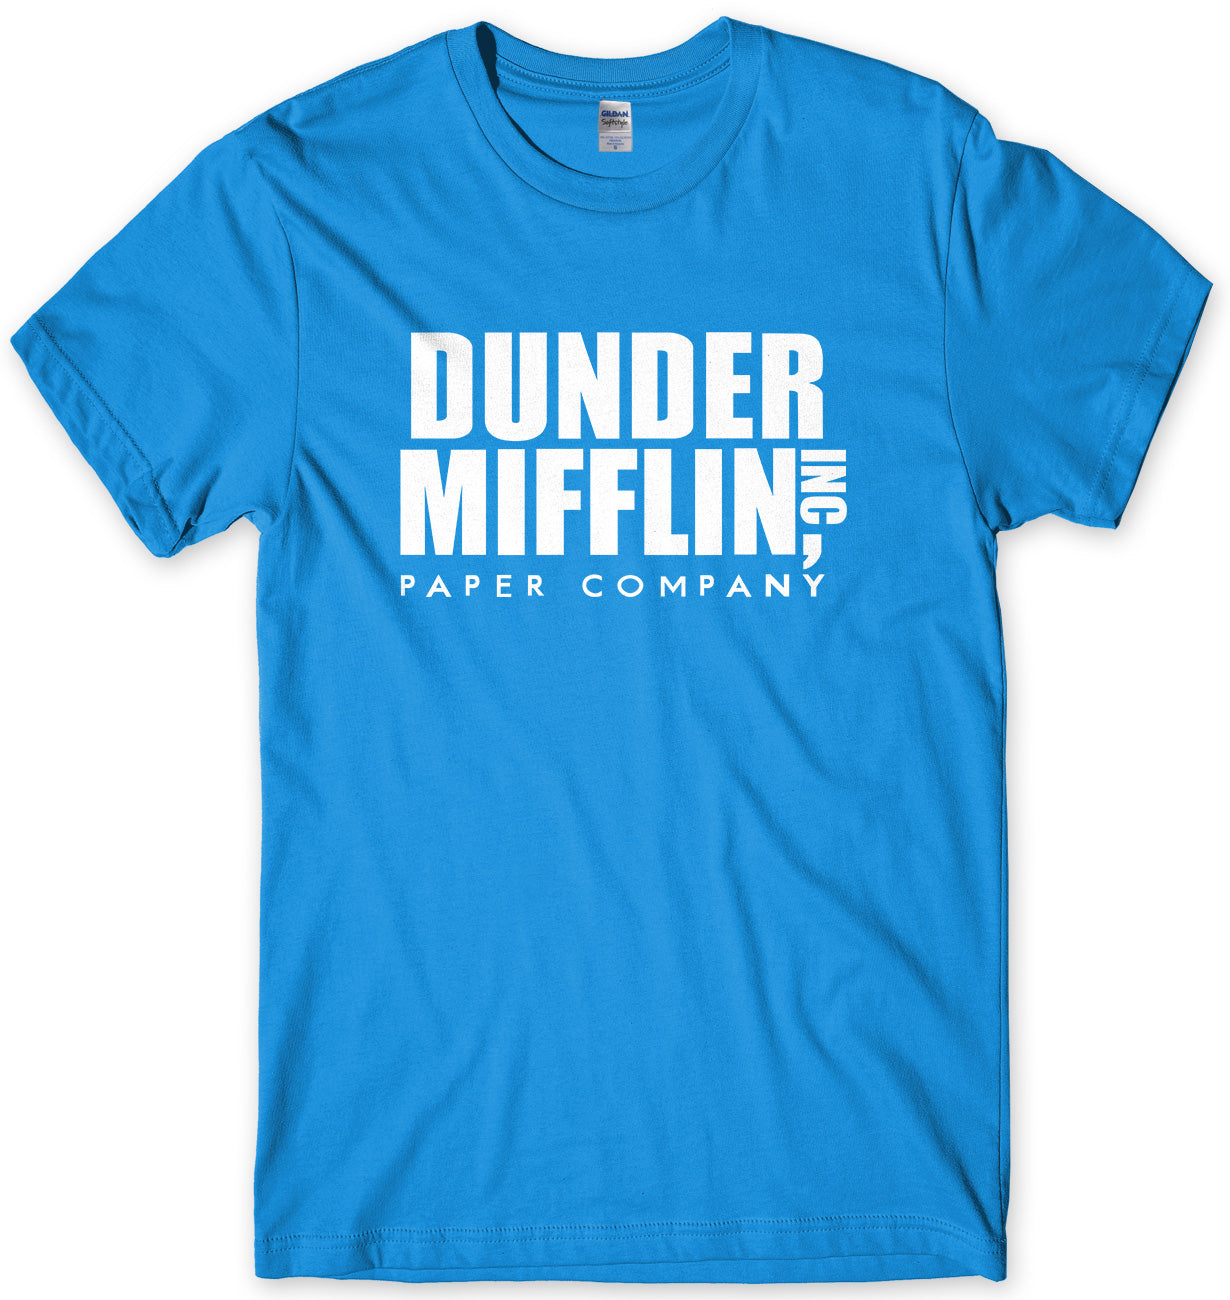 DUNDER MIFFLIN PAPER COMPANY - INSPIRED BY THE OFFICE US MENS UNISEX T-SHIRT